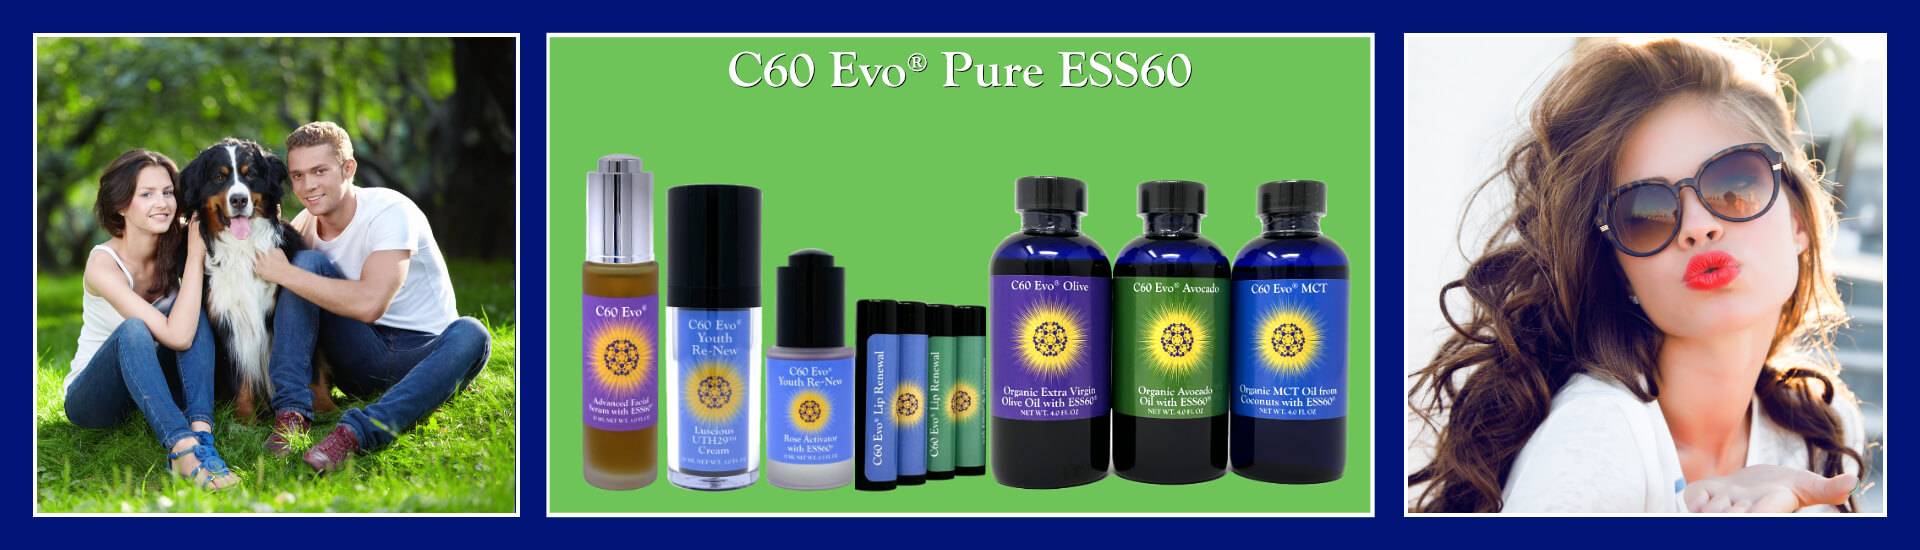 Late summer header with C60 Evo Advanced Skin and Energy Set